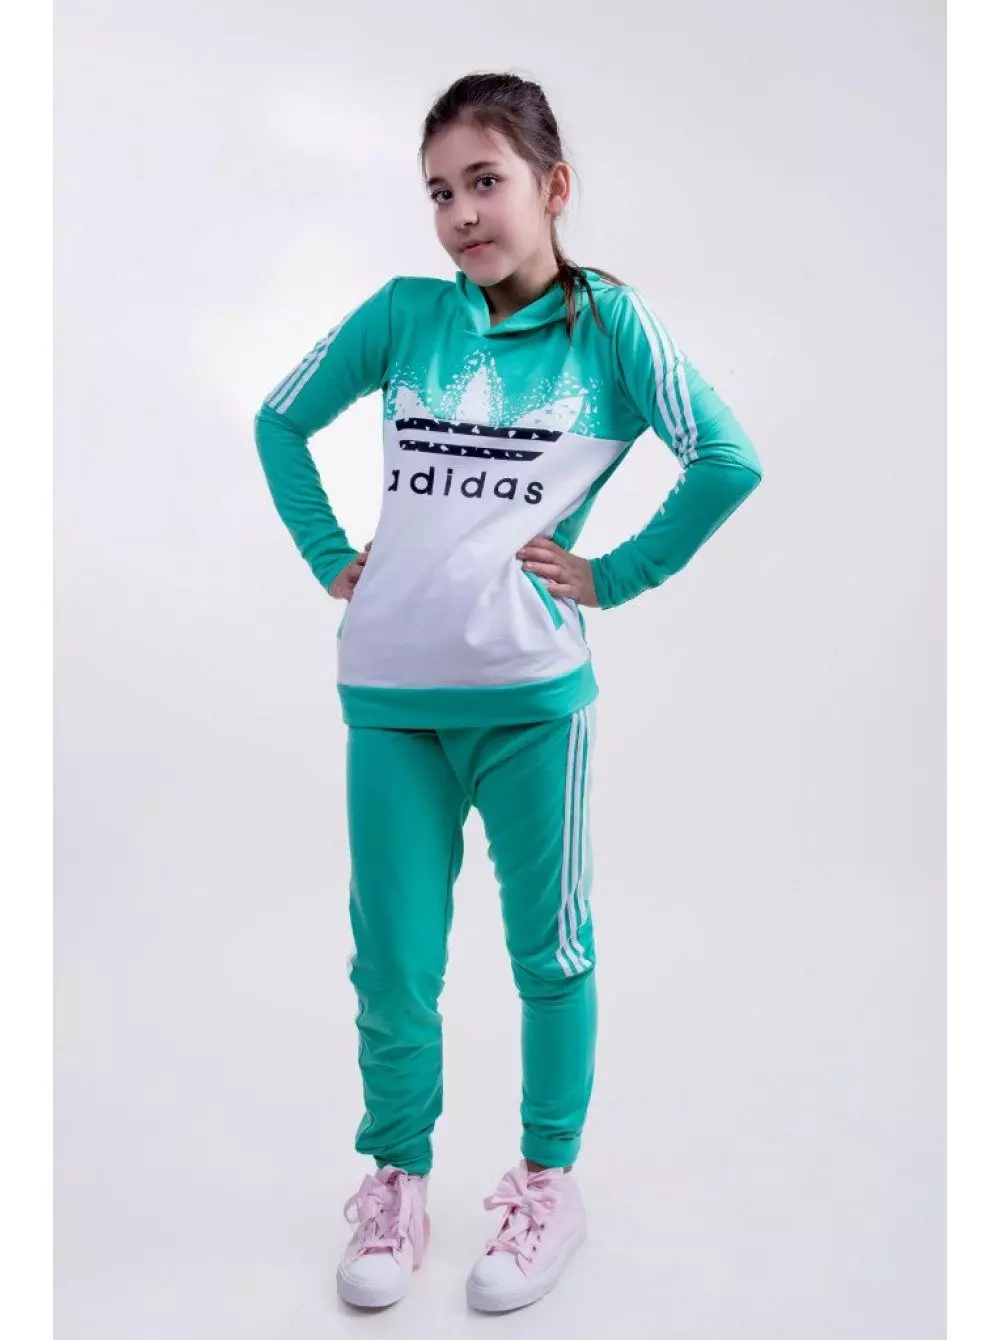 Adidas Sports Suits (100 photos): Female and Children's Sport Suit, ADIDAS Porsche Design, Performance and Real Madrid 1388_26